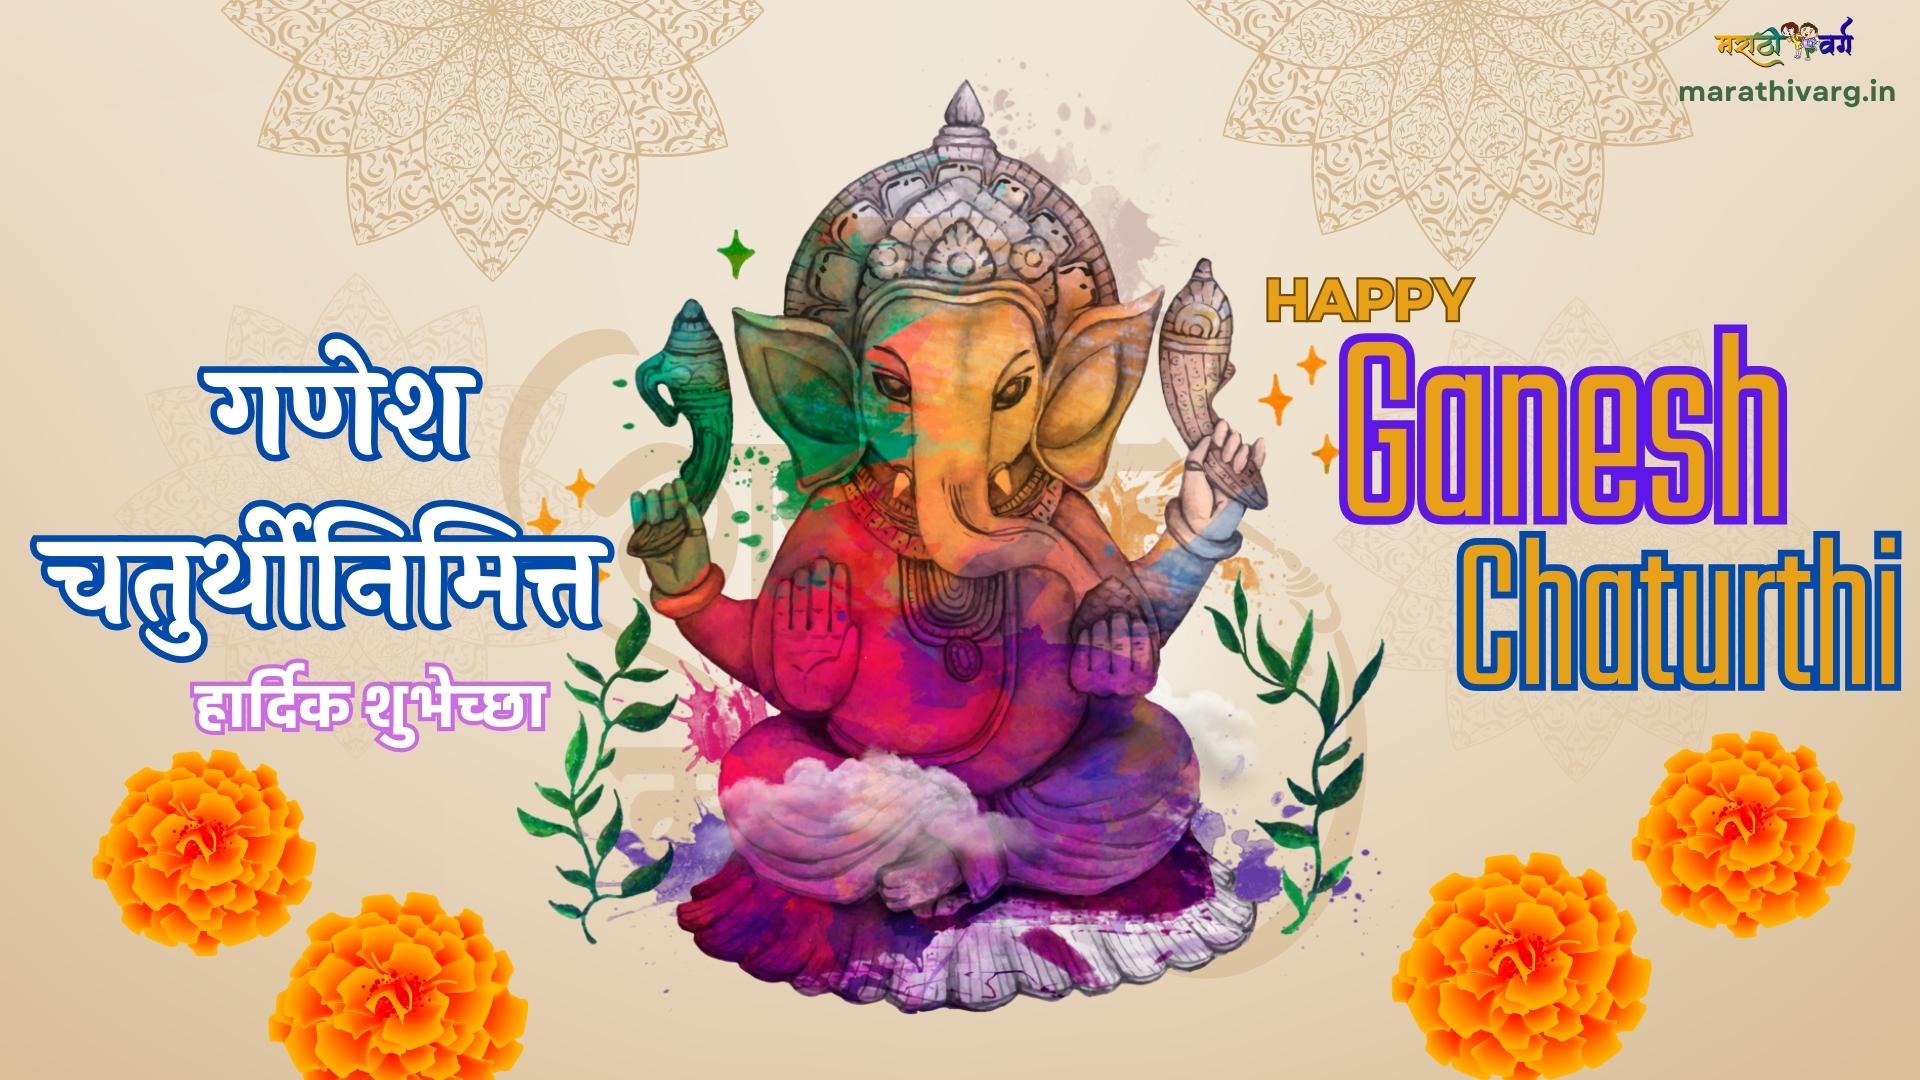 Greetings Quotes Images and Wishes for a Joyful Ganesh Chaturthi 2023